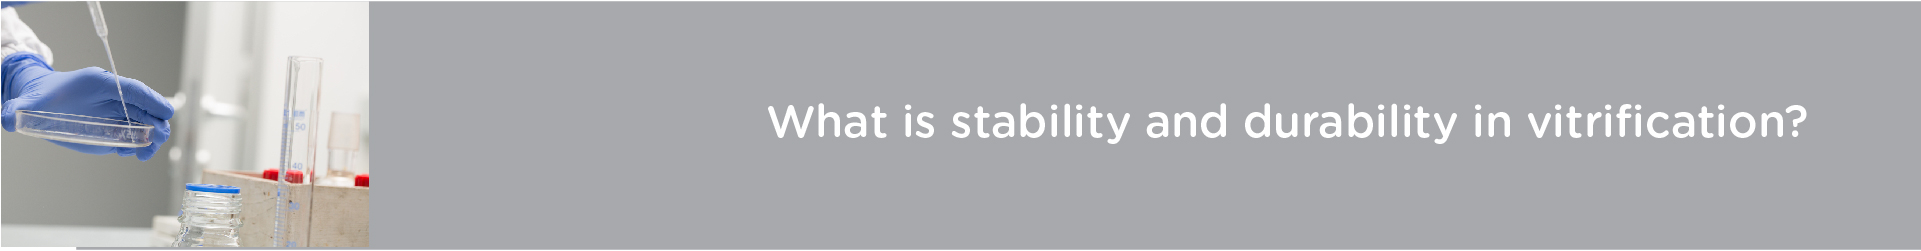 What is Stability and Durability in Vitrification?